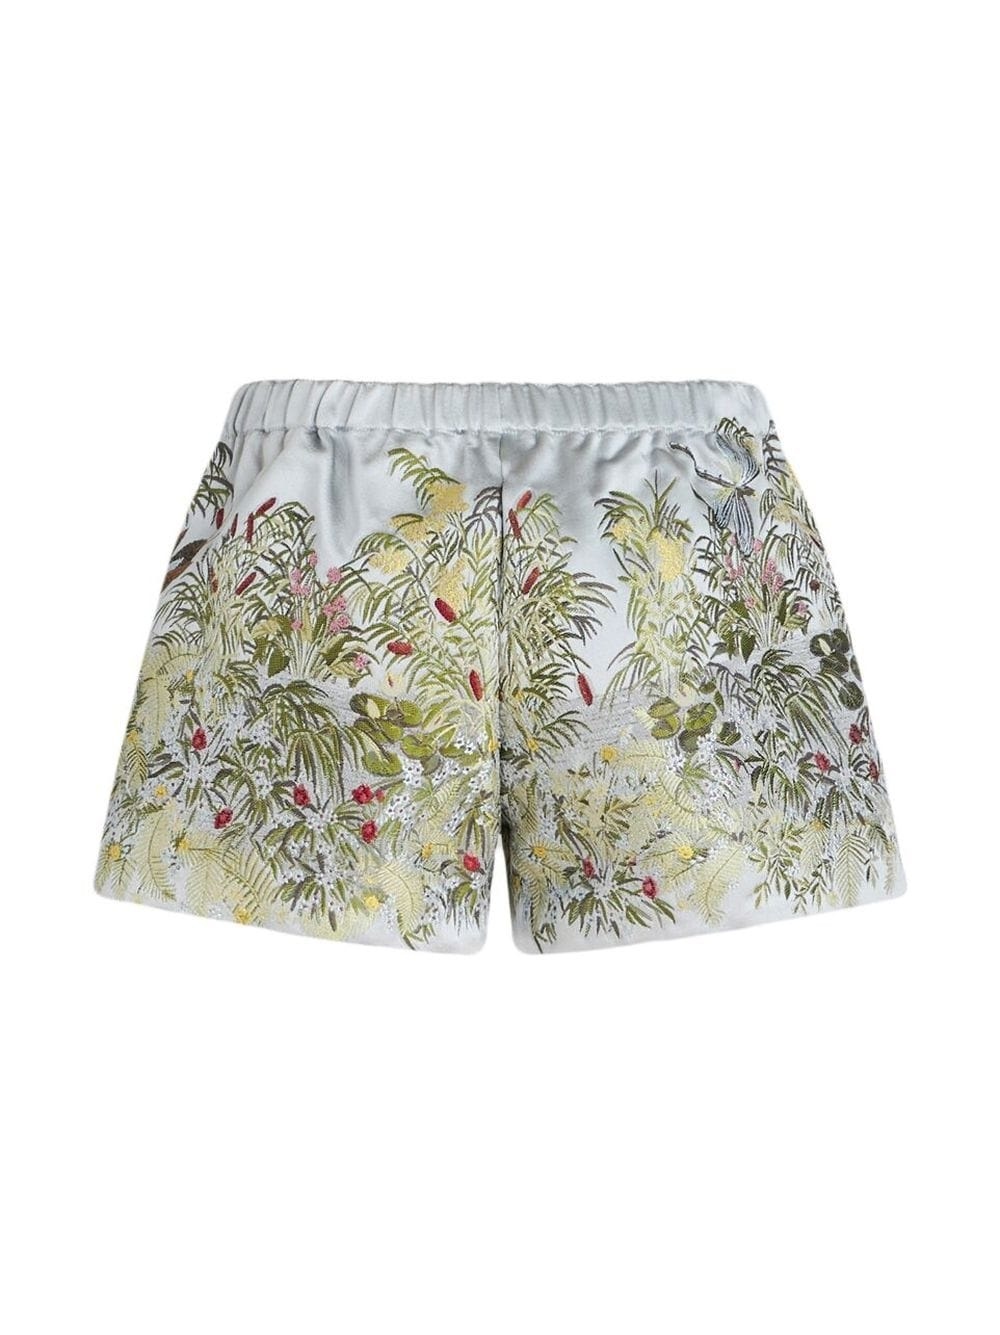 embroidered satin shorts - 6